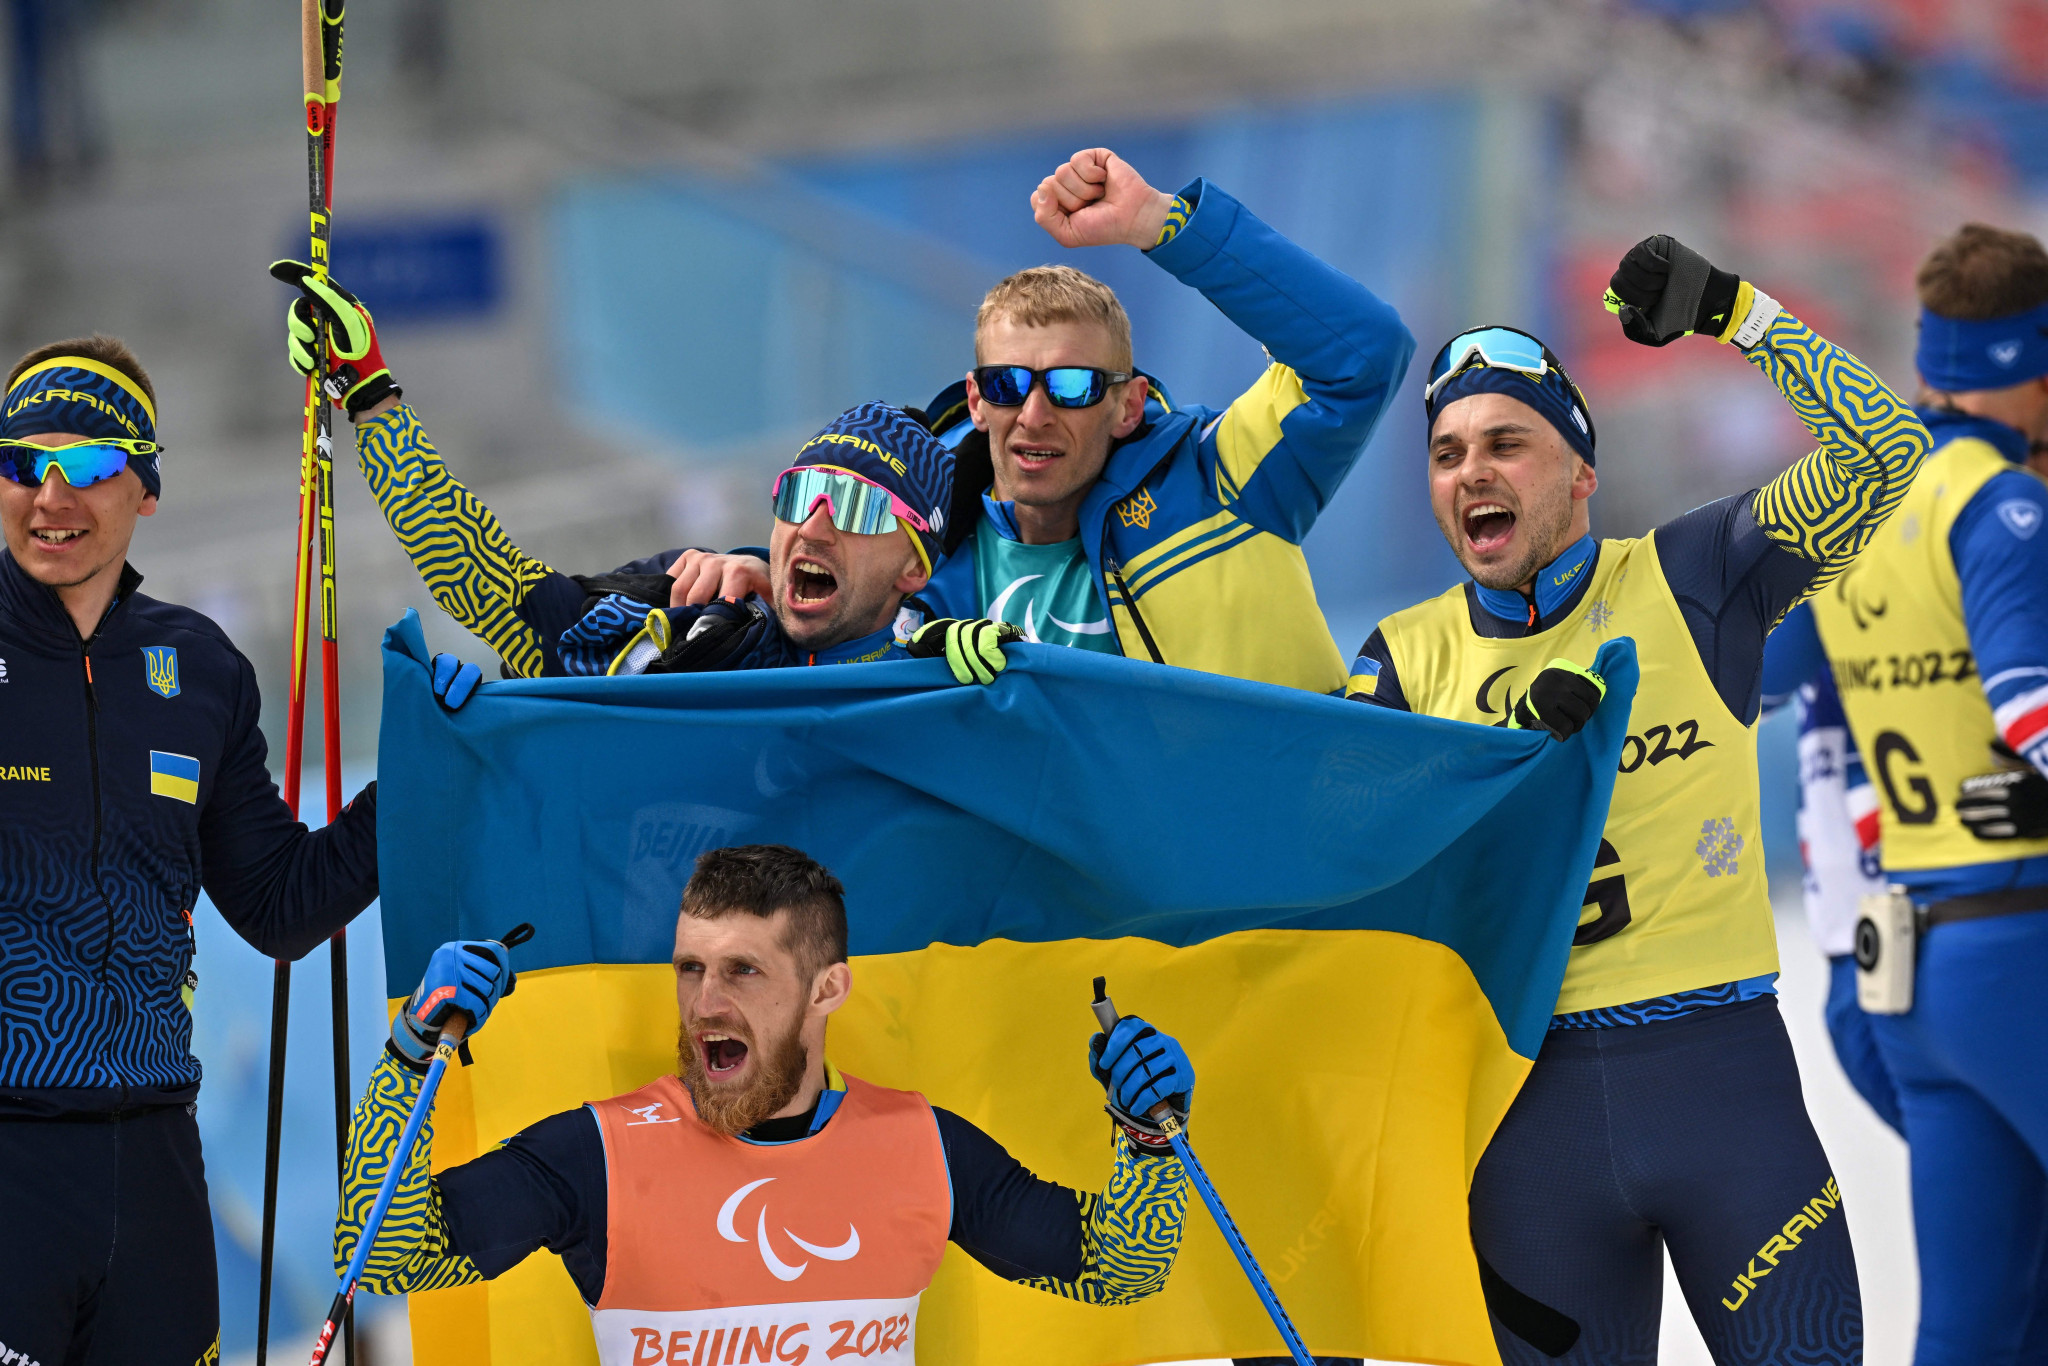 Ukraine won the open  4x2.5 kilometres relay in the cross-country skiing ©Getty Images